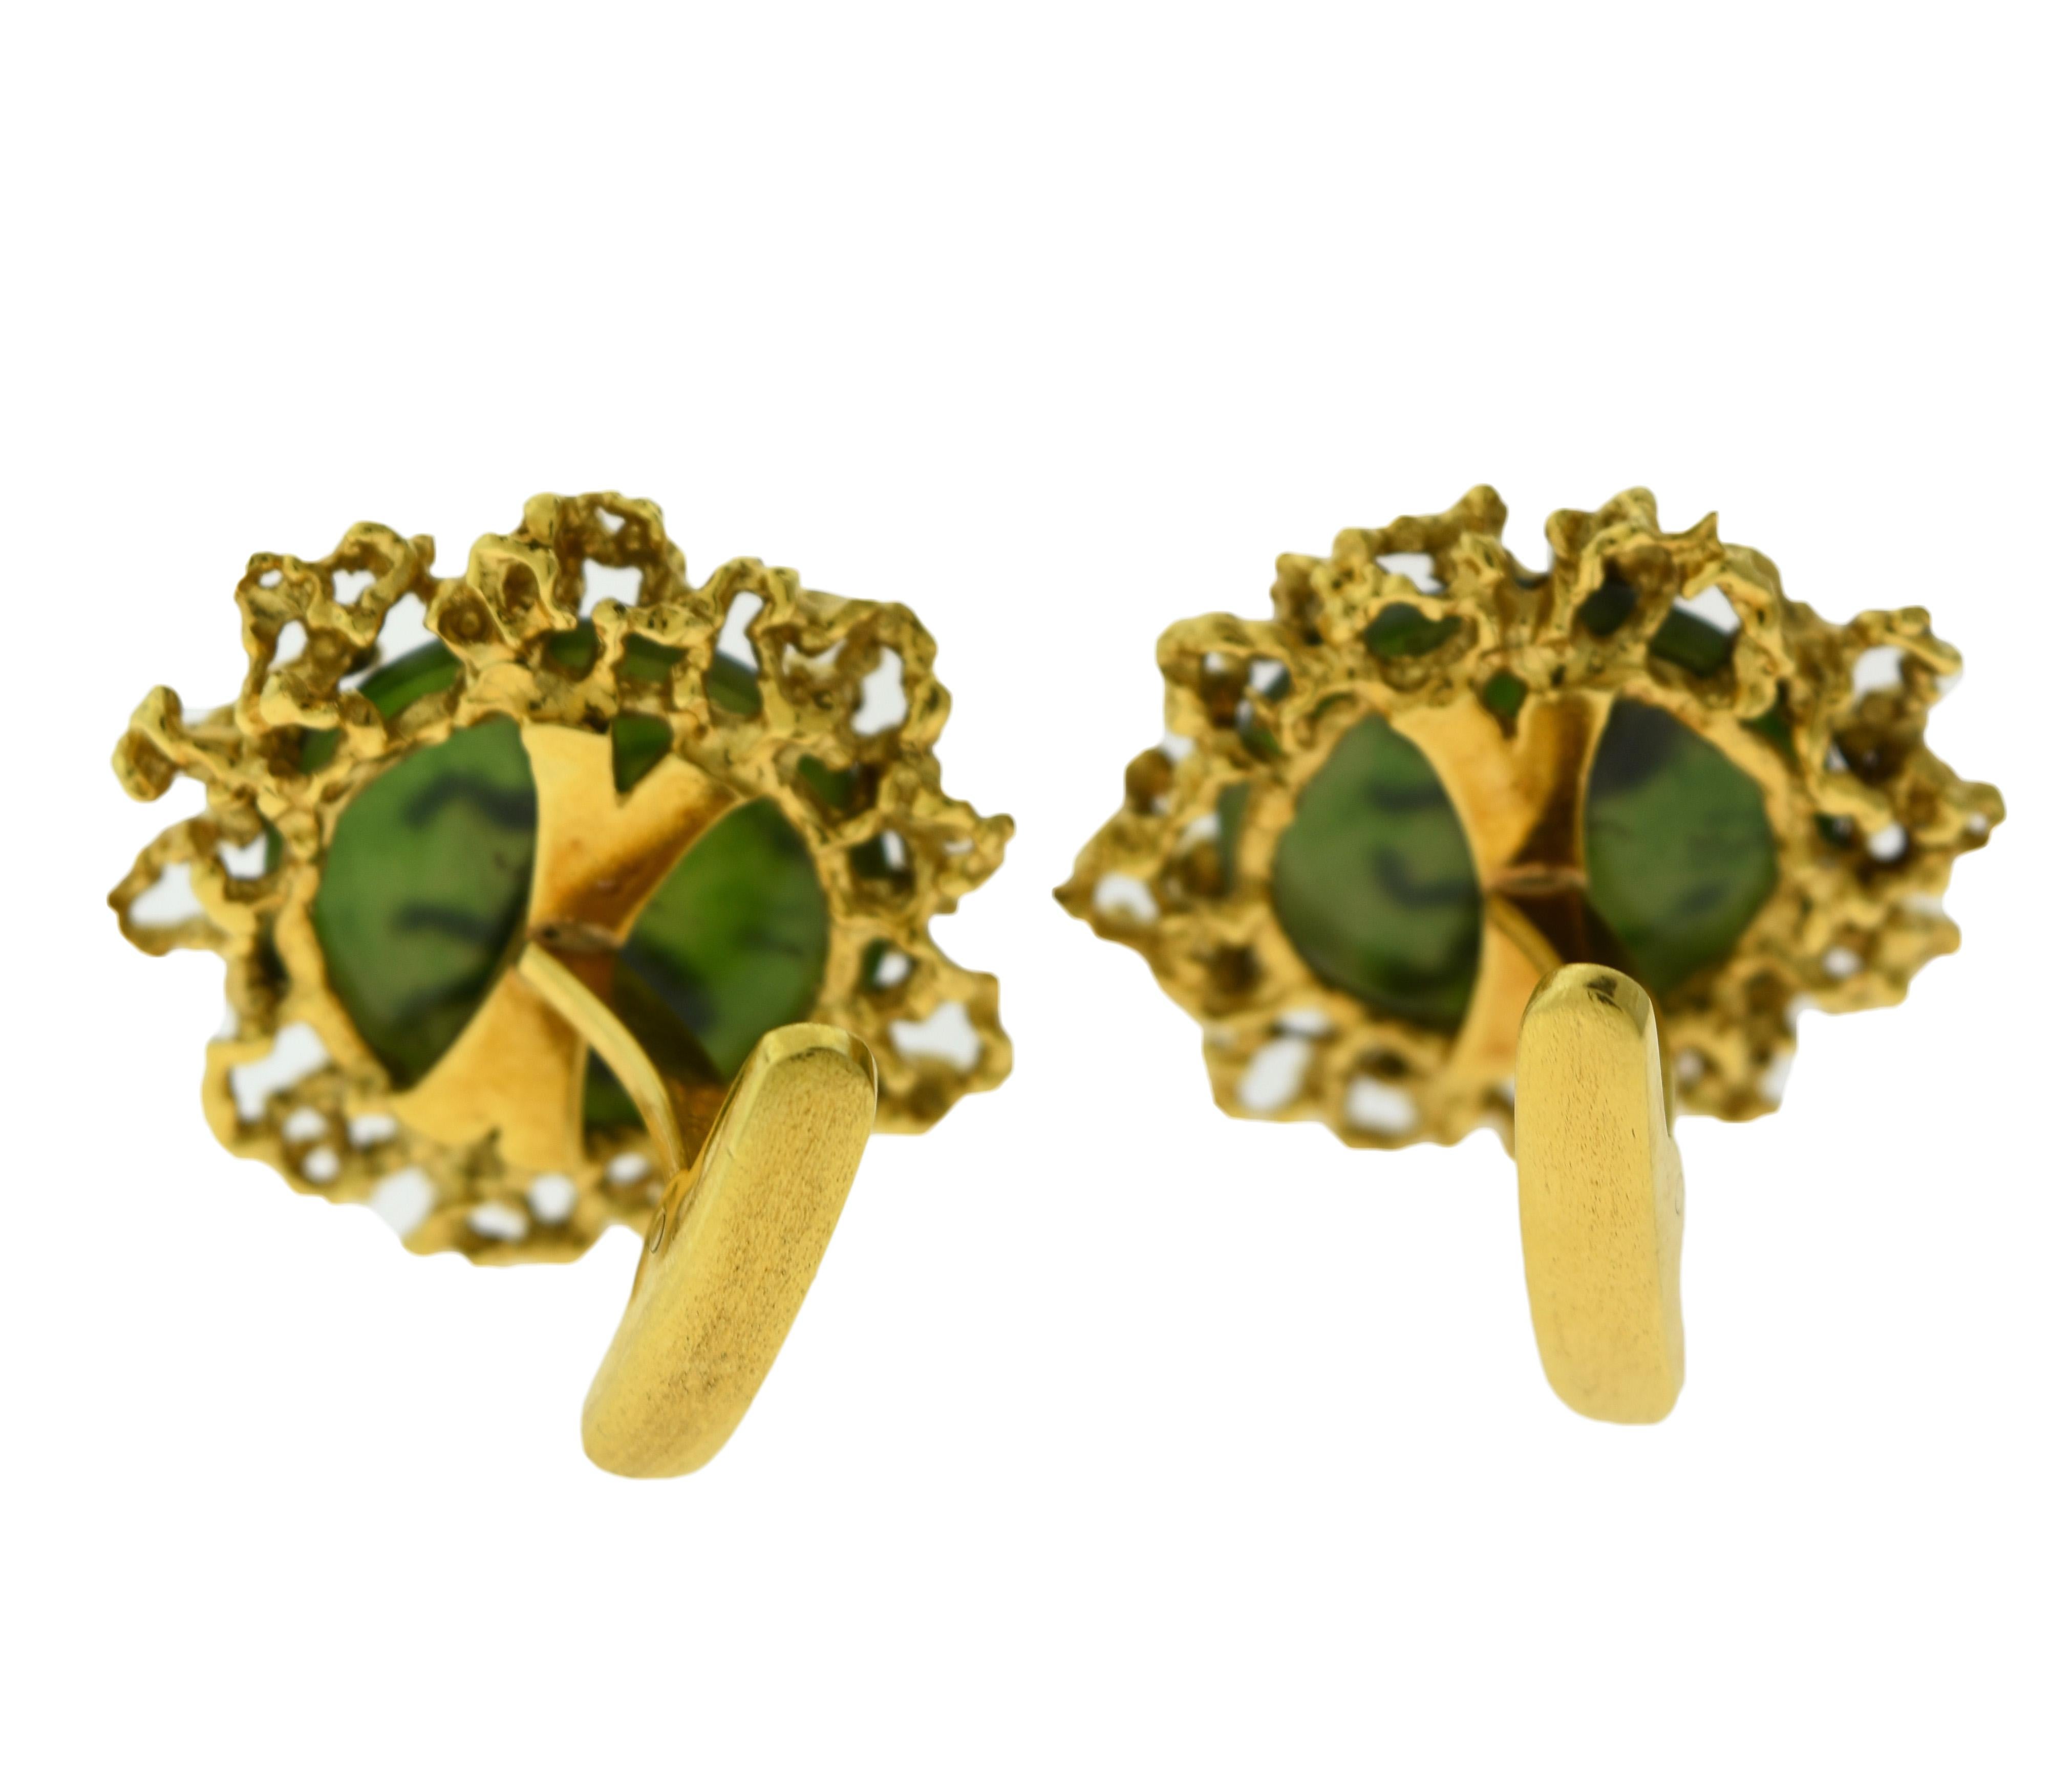 Brilliance Jewels, Miami
Questions? Call Us Anytime!
786,482,8100

Elegant, statement making Chrysoprase and 18K Yellow Gold cufflinks with a gold inlay in the shape of a lion. 